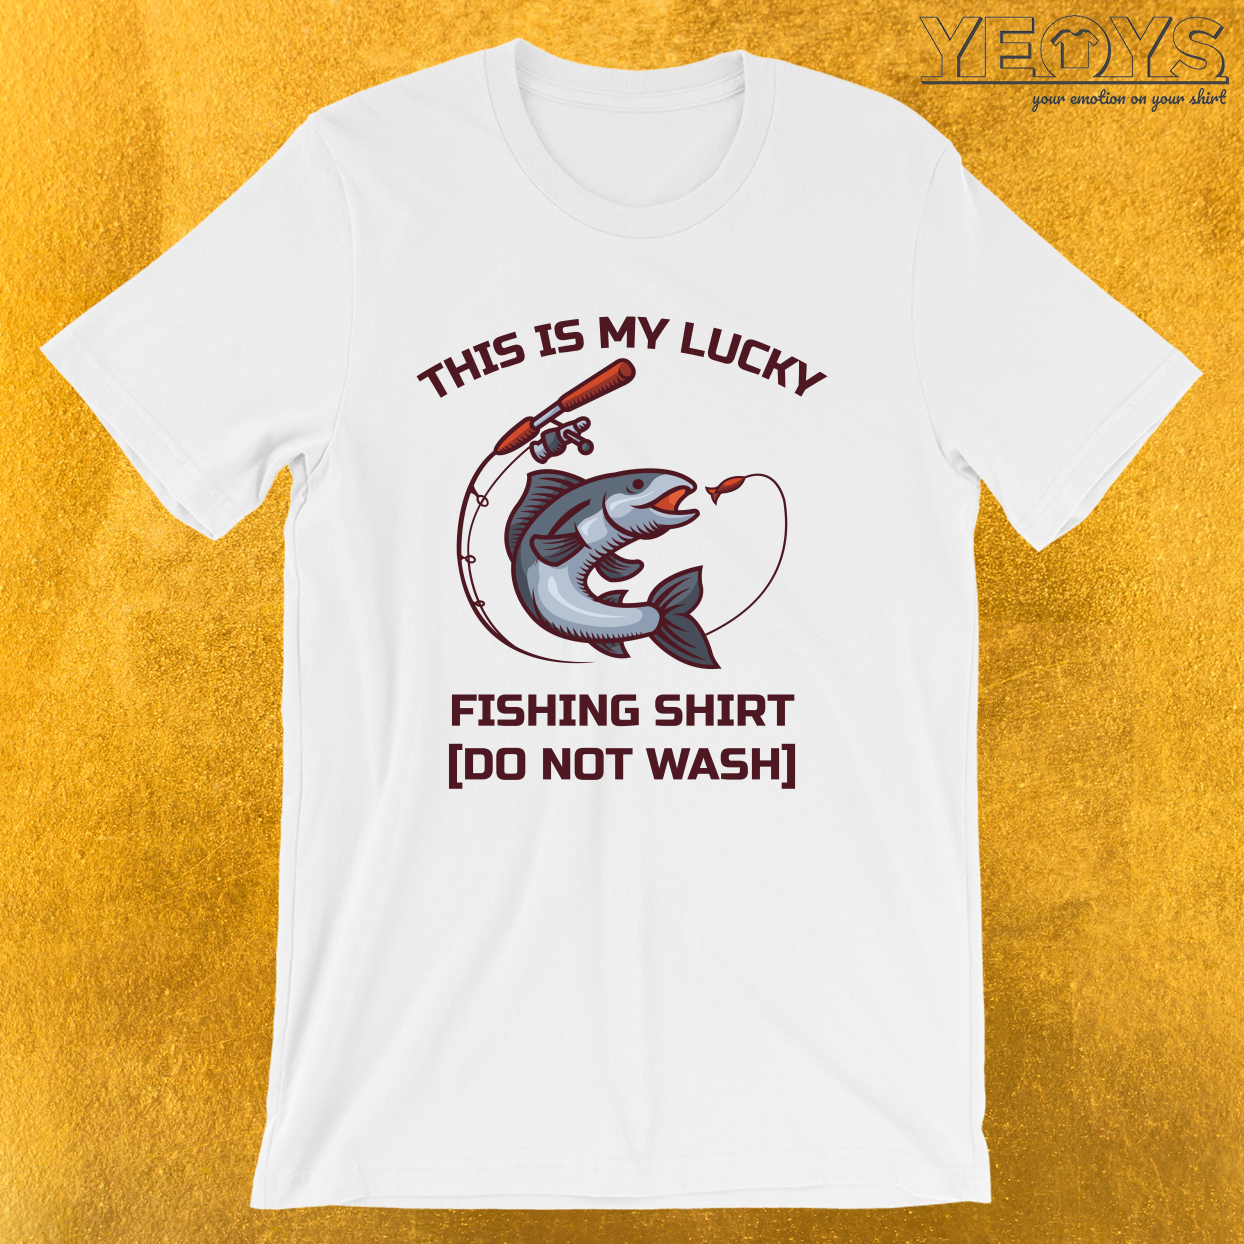 This Is My Lucky Fishing Shirt Do Not Wash – Funny Fishing Tee